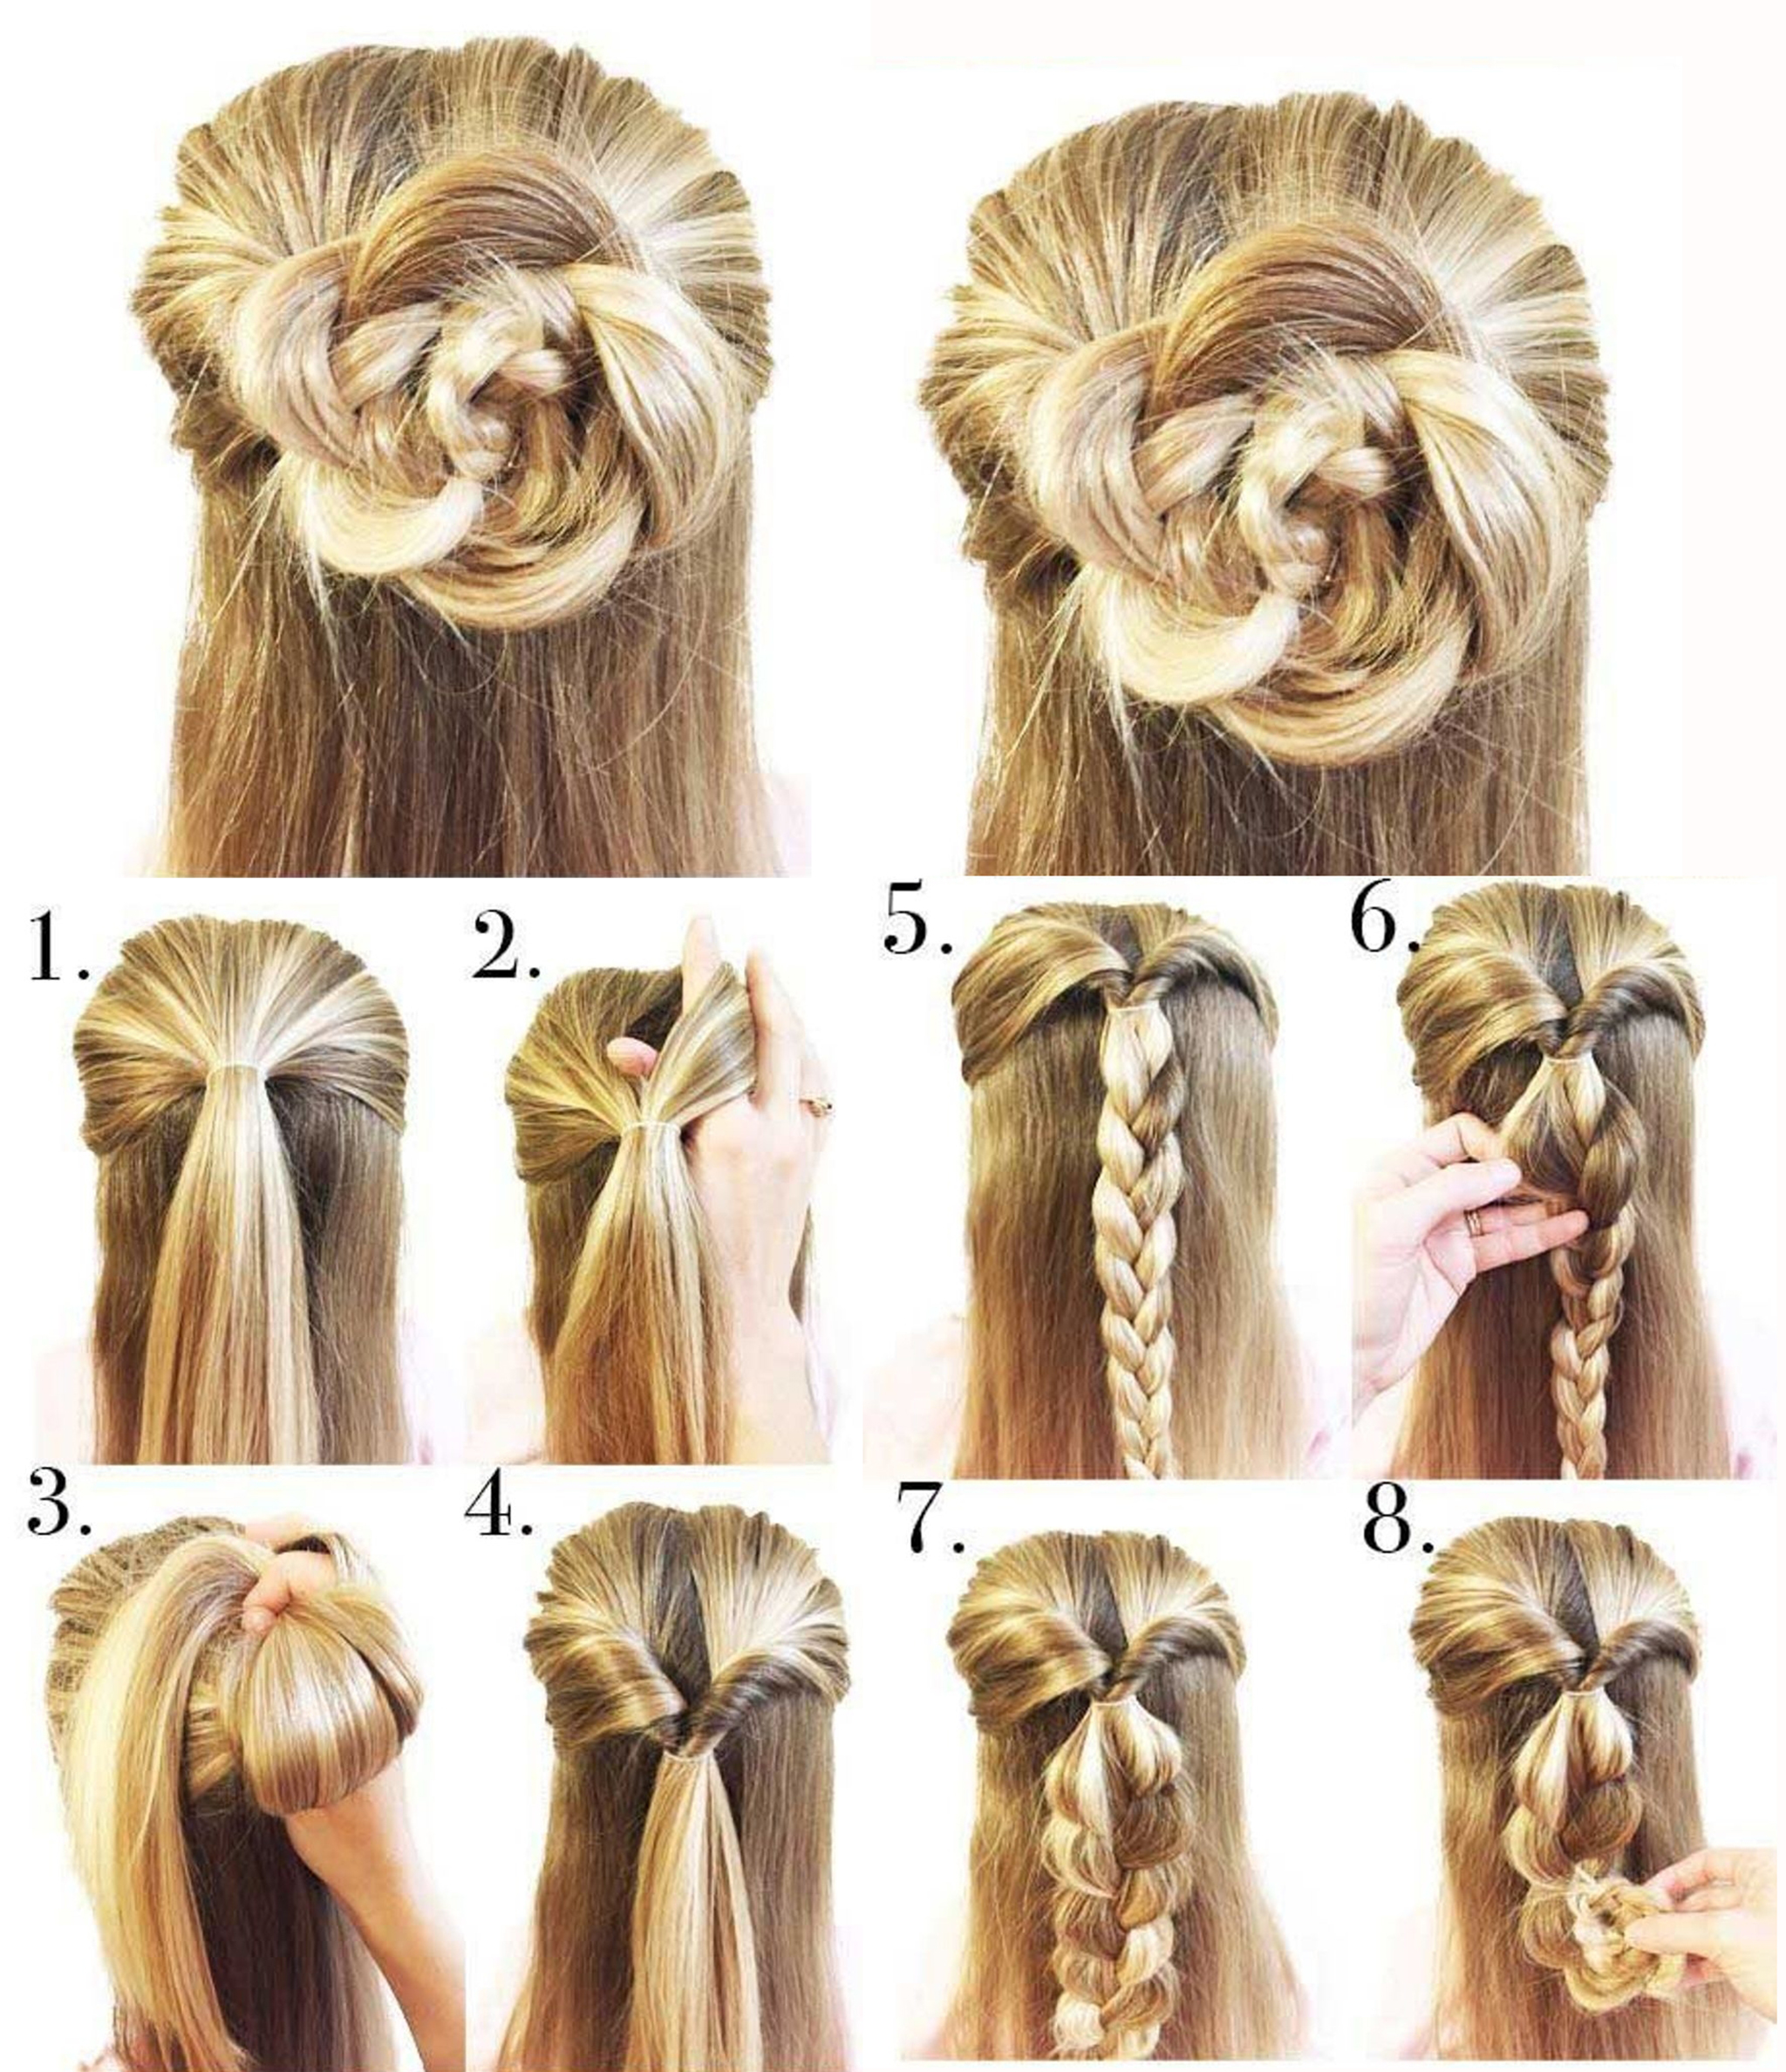 Easy Step By Step Tutorials On How To Do Braided Hairstyle ...